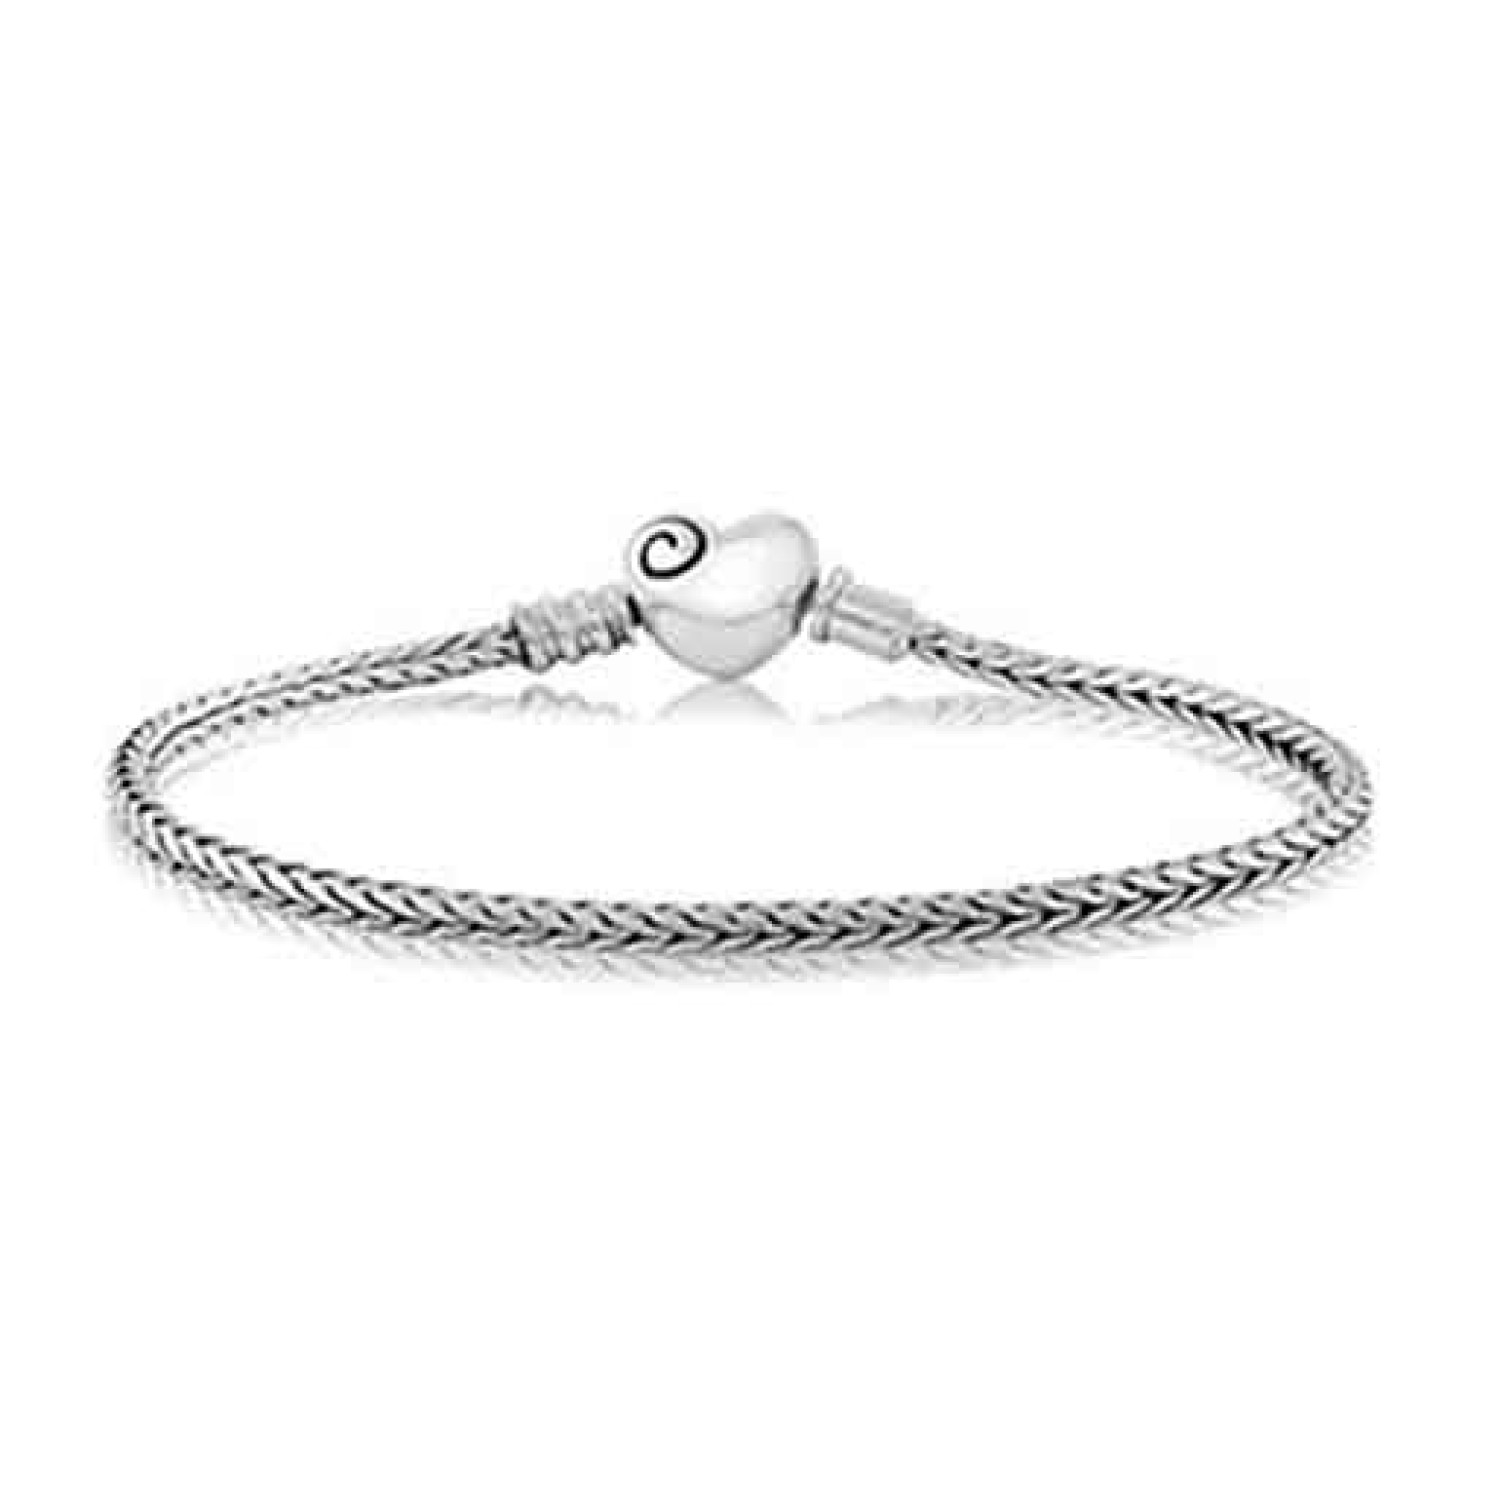 Evolve Charms Heart Clasp Bracelet - 3B11052. Beautifully engraved with a koru representing new beginnings and eternal growth, Evolves Heart Clasp celebrates the deep bonds we share with our loved ones. A specially chosen chain design creates a very Kiwi,